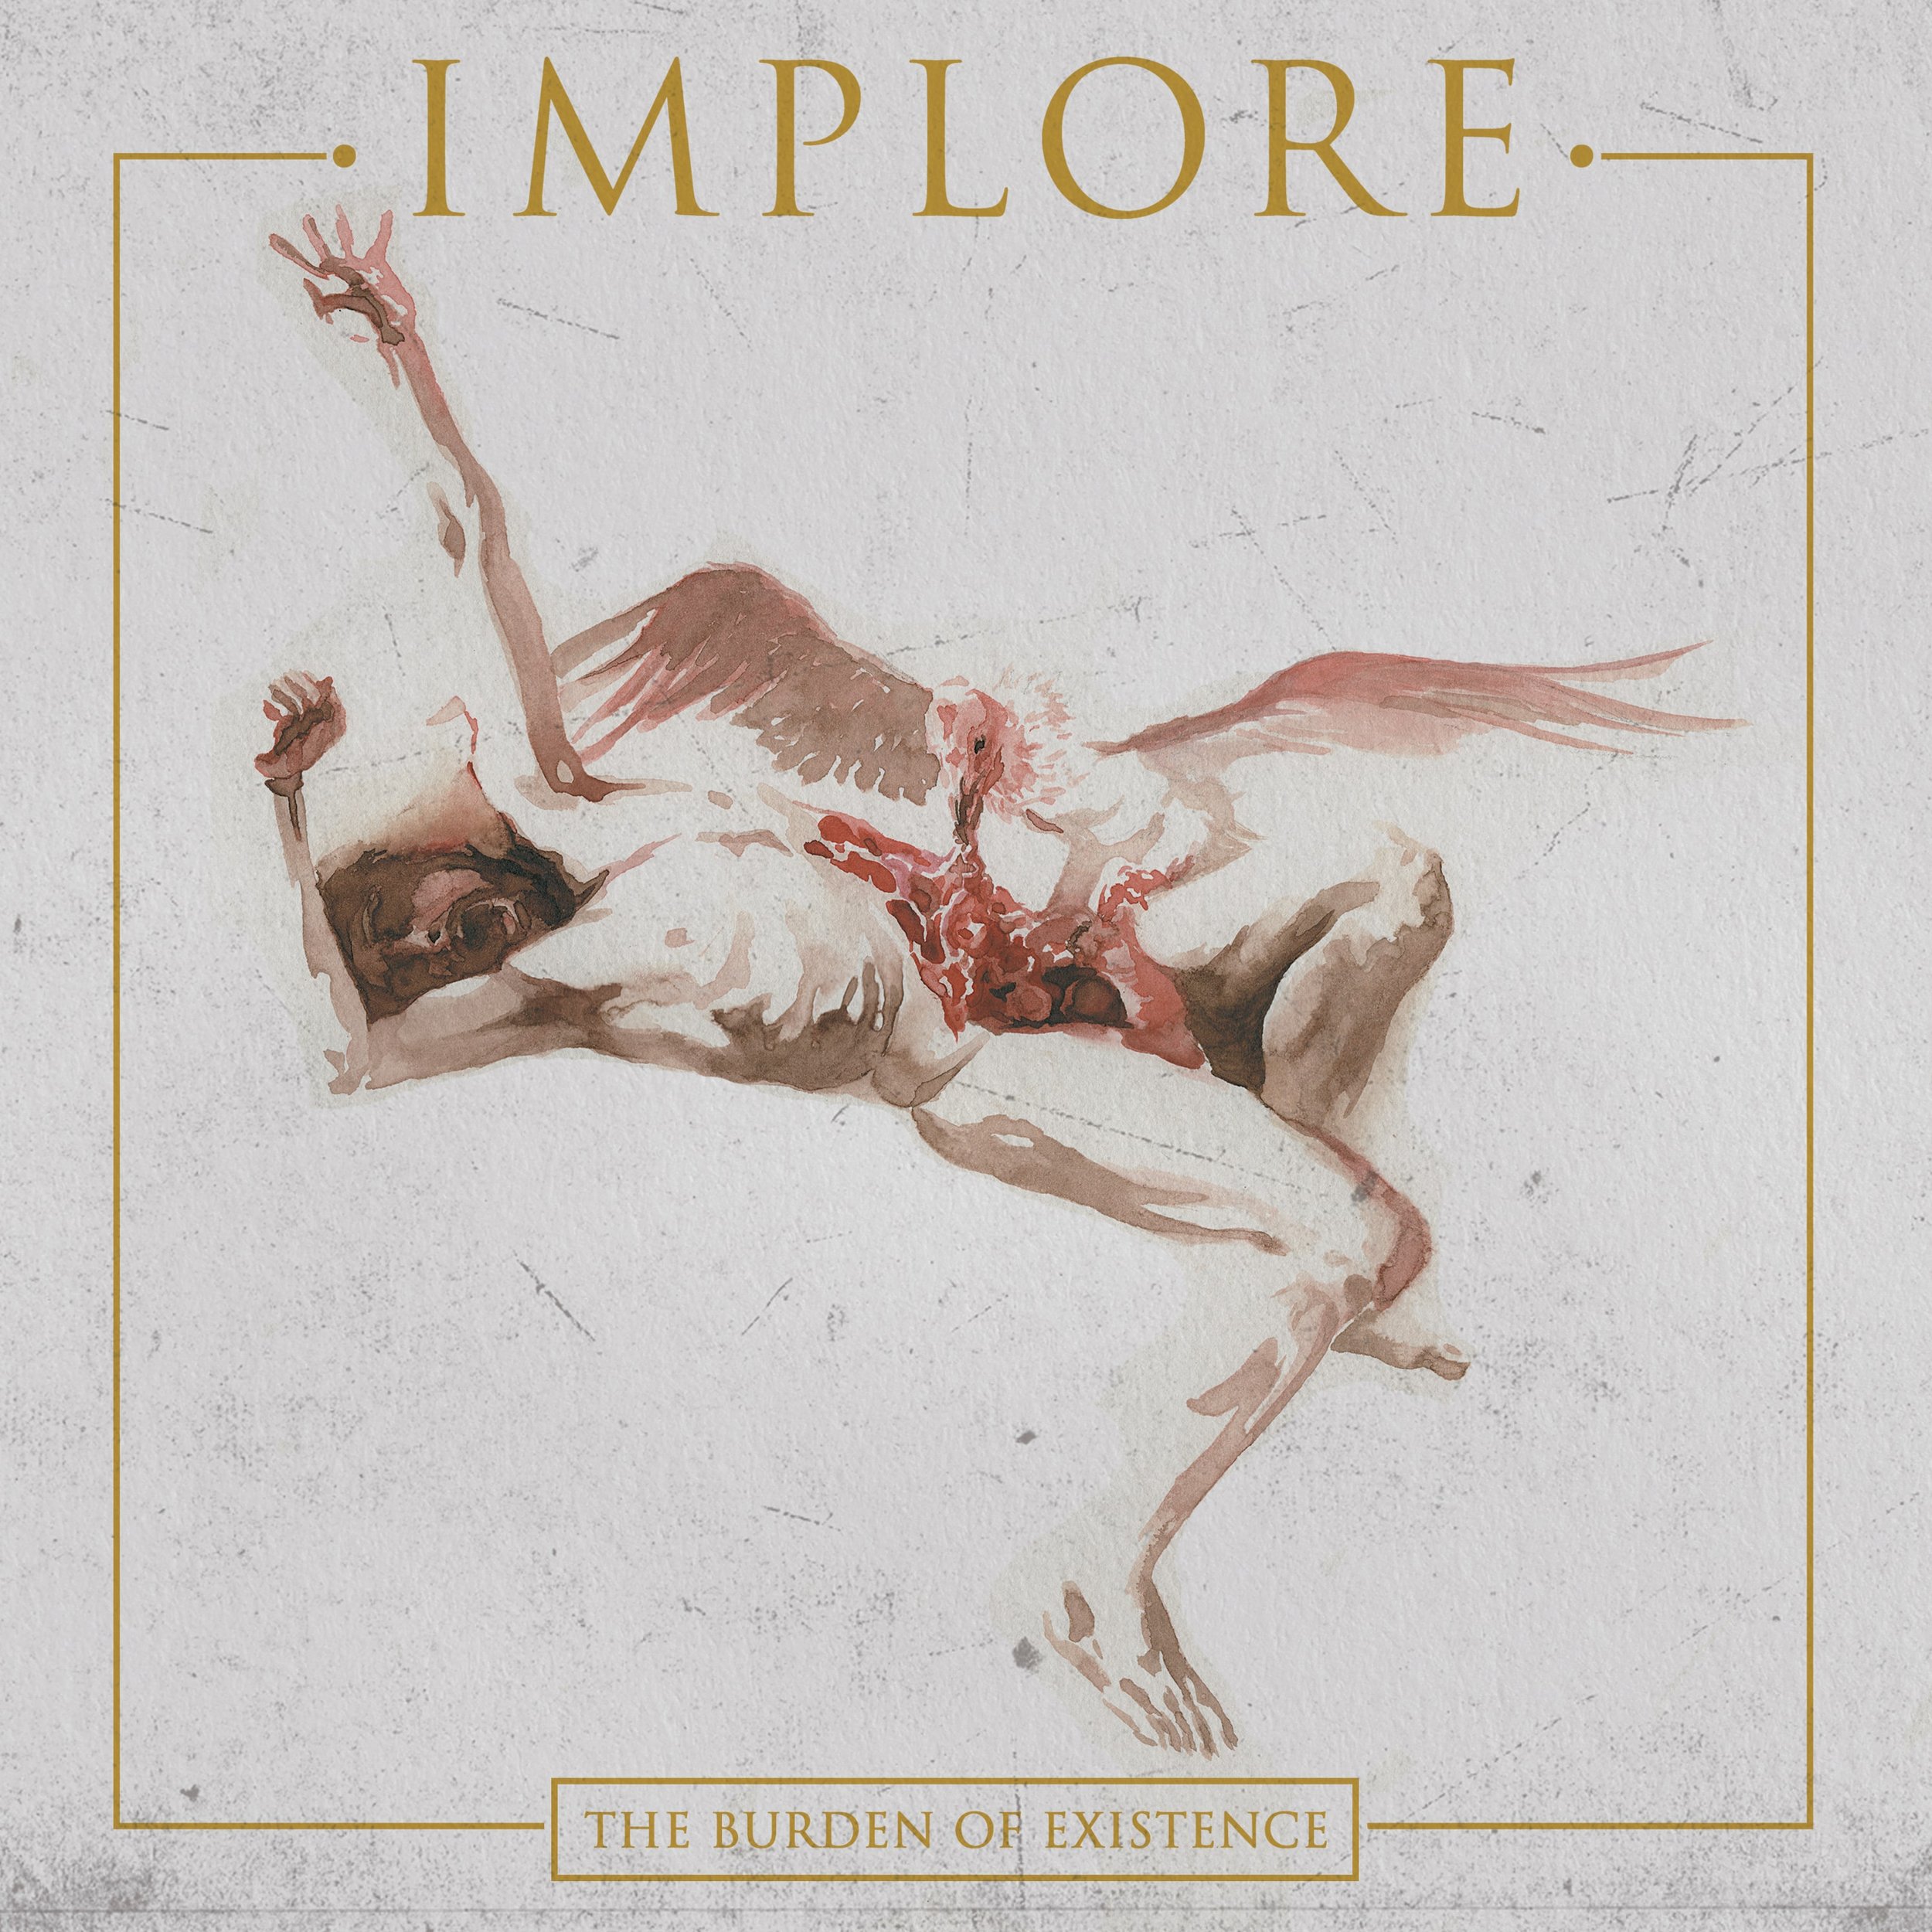 implore - the burden of existence - cover.jpg